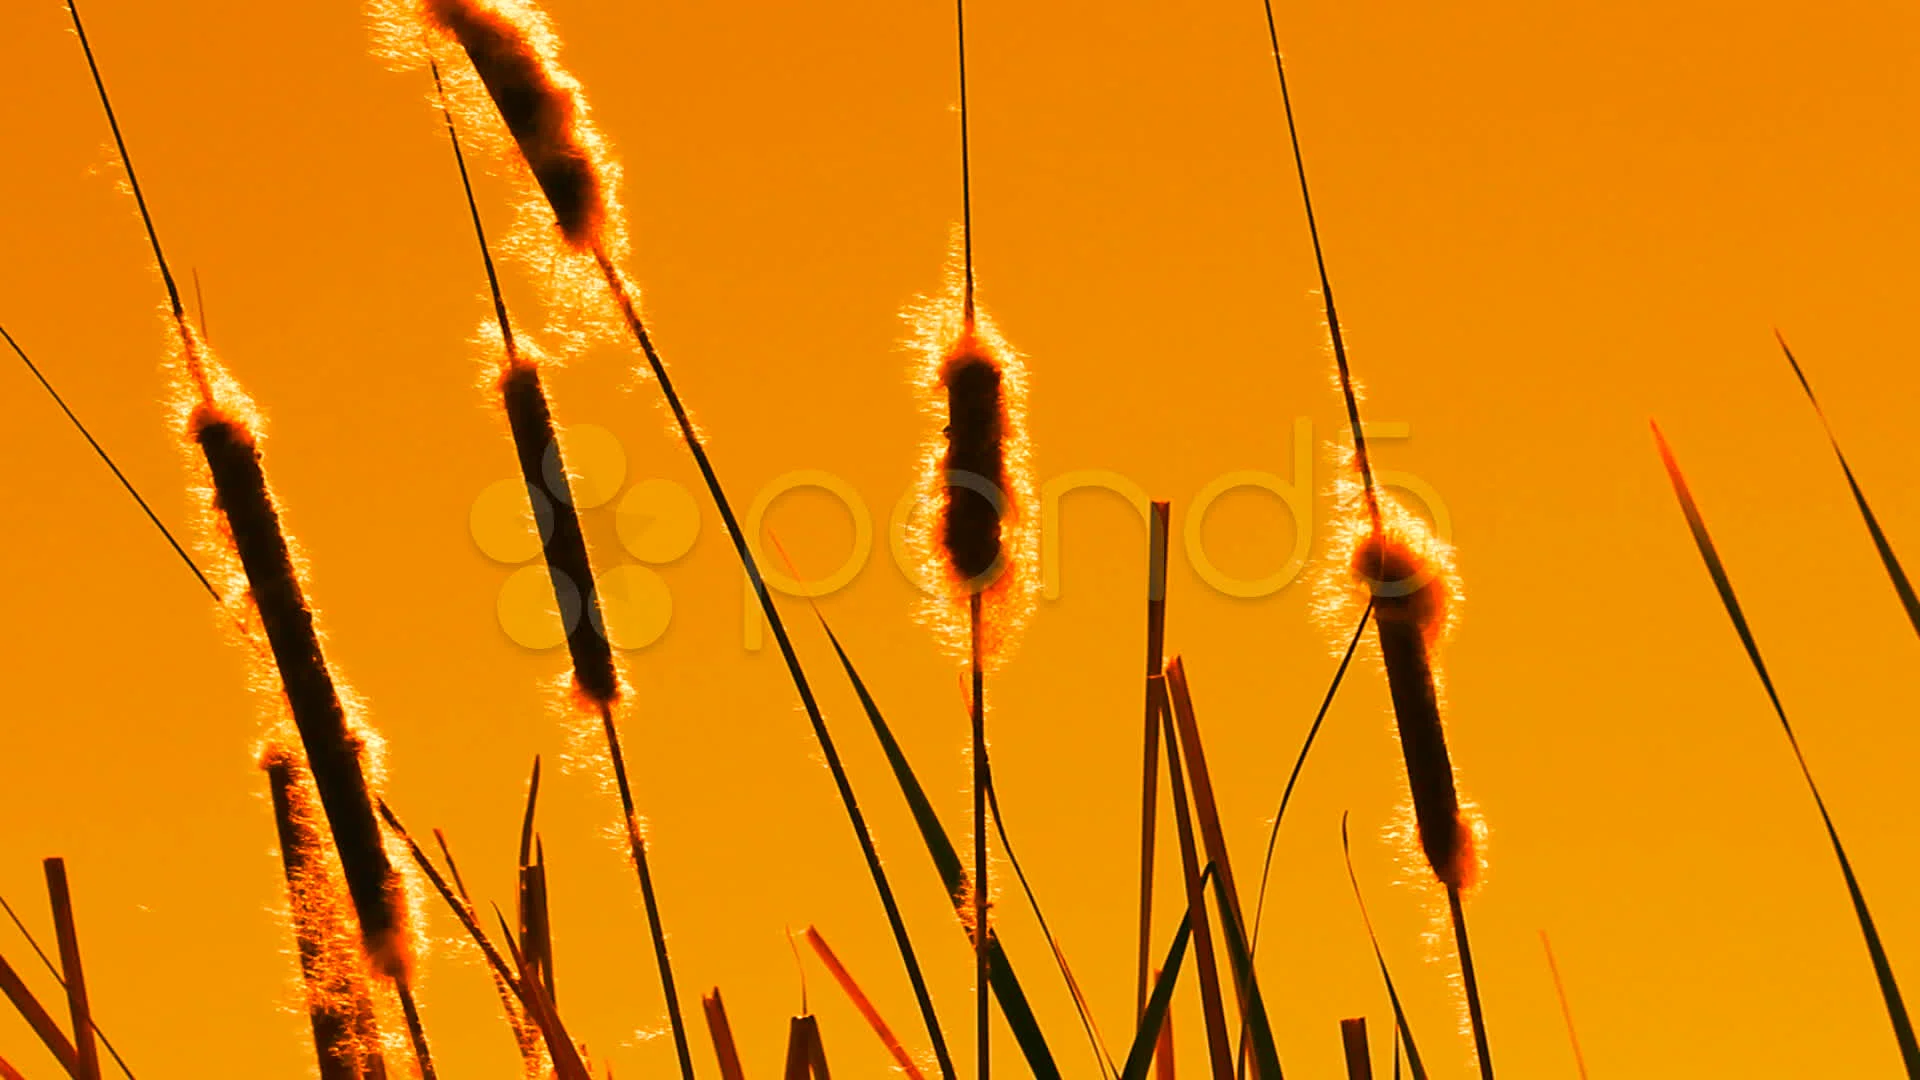 Cattail Silhouette Sunset Hd 4k Stock Footage 10815383 Images, Photos, Reviews